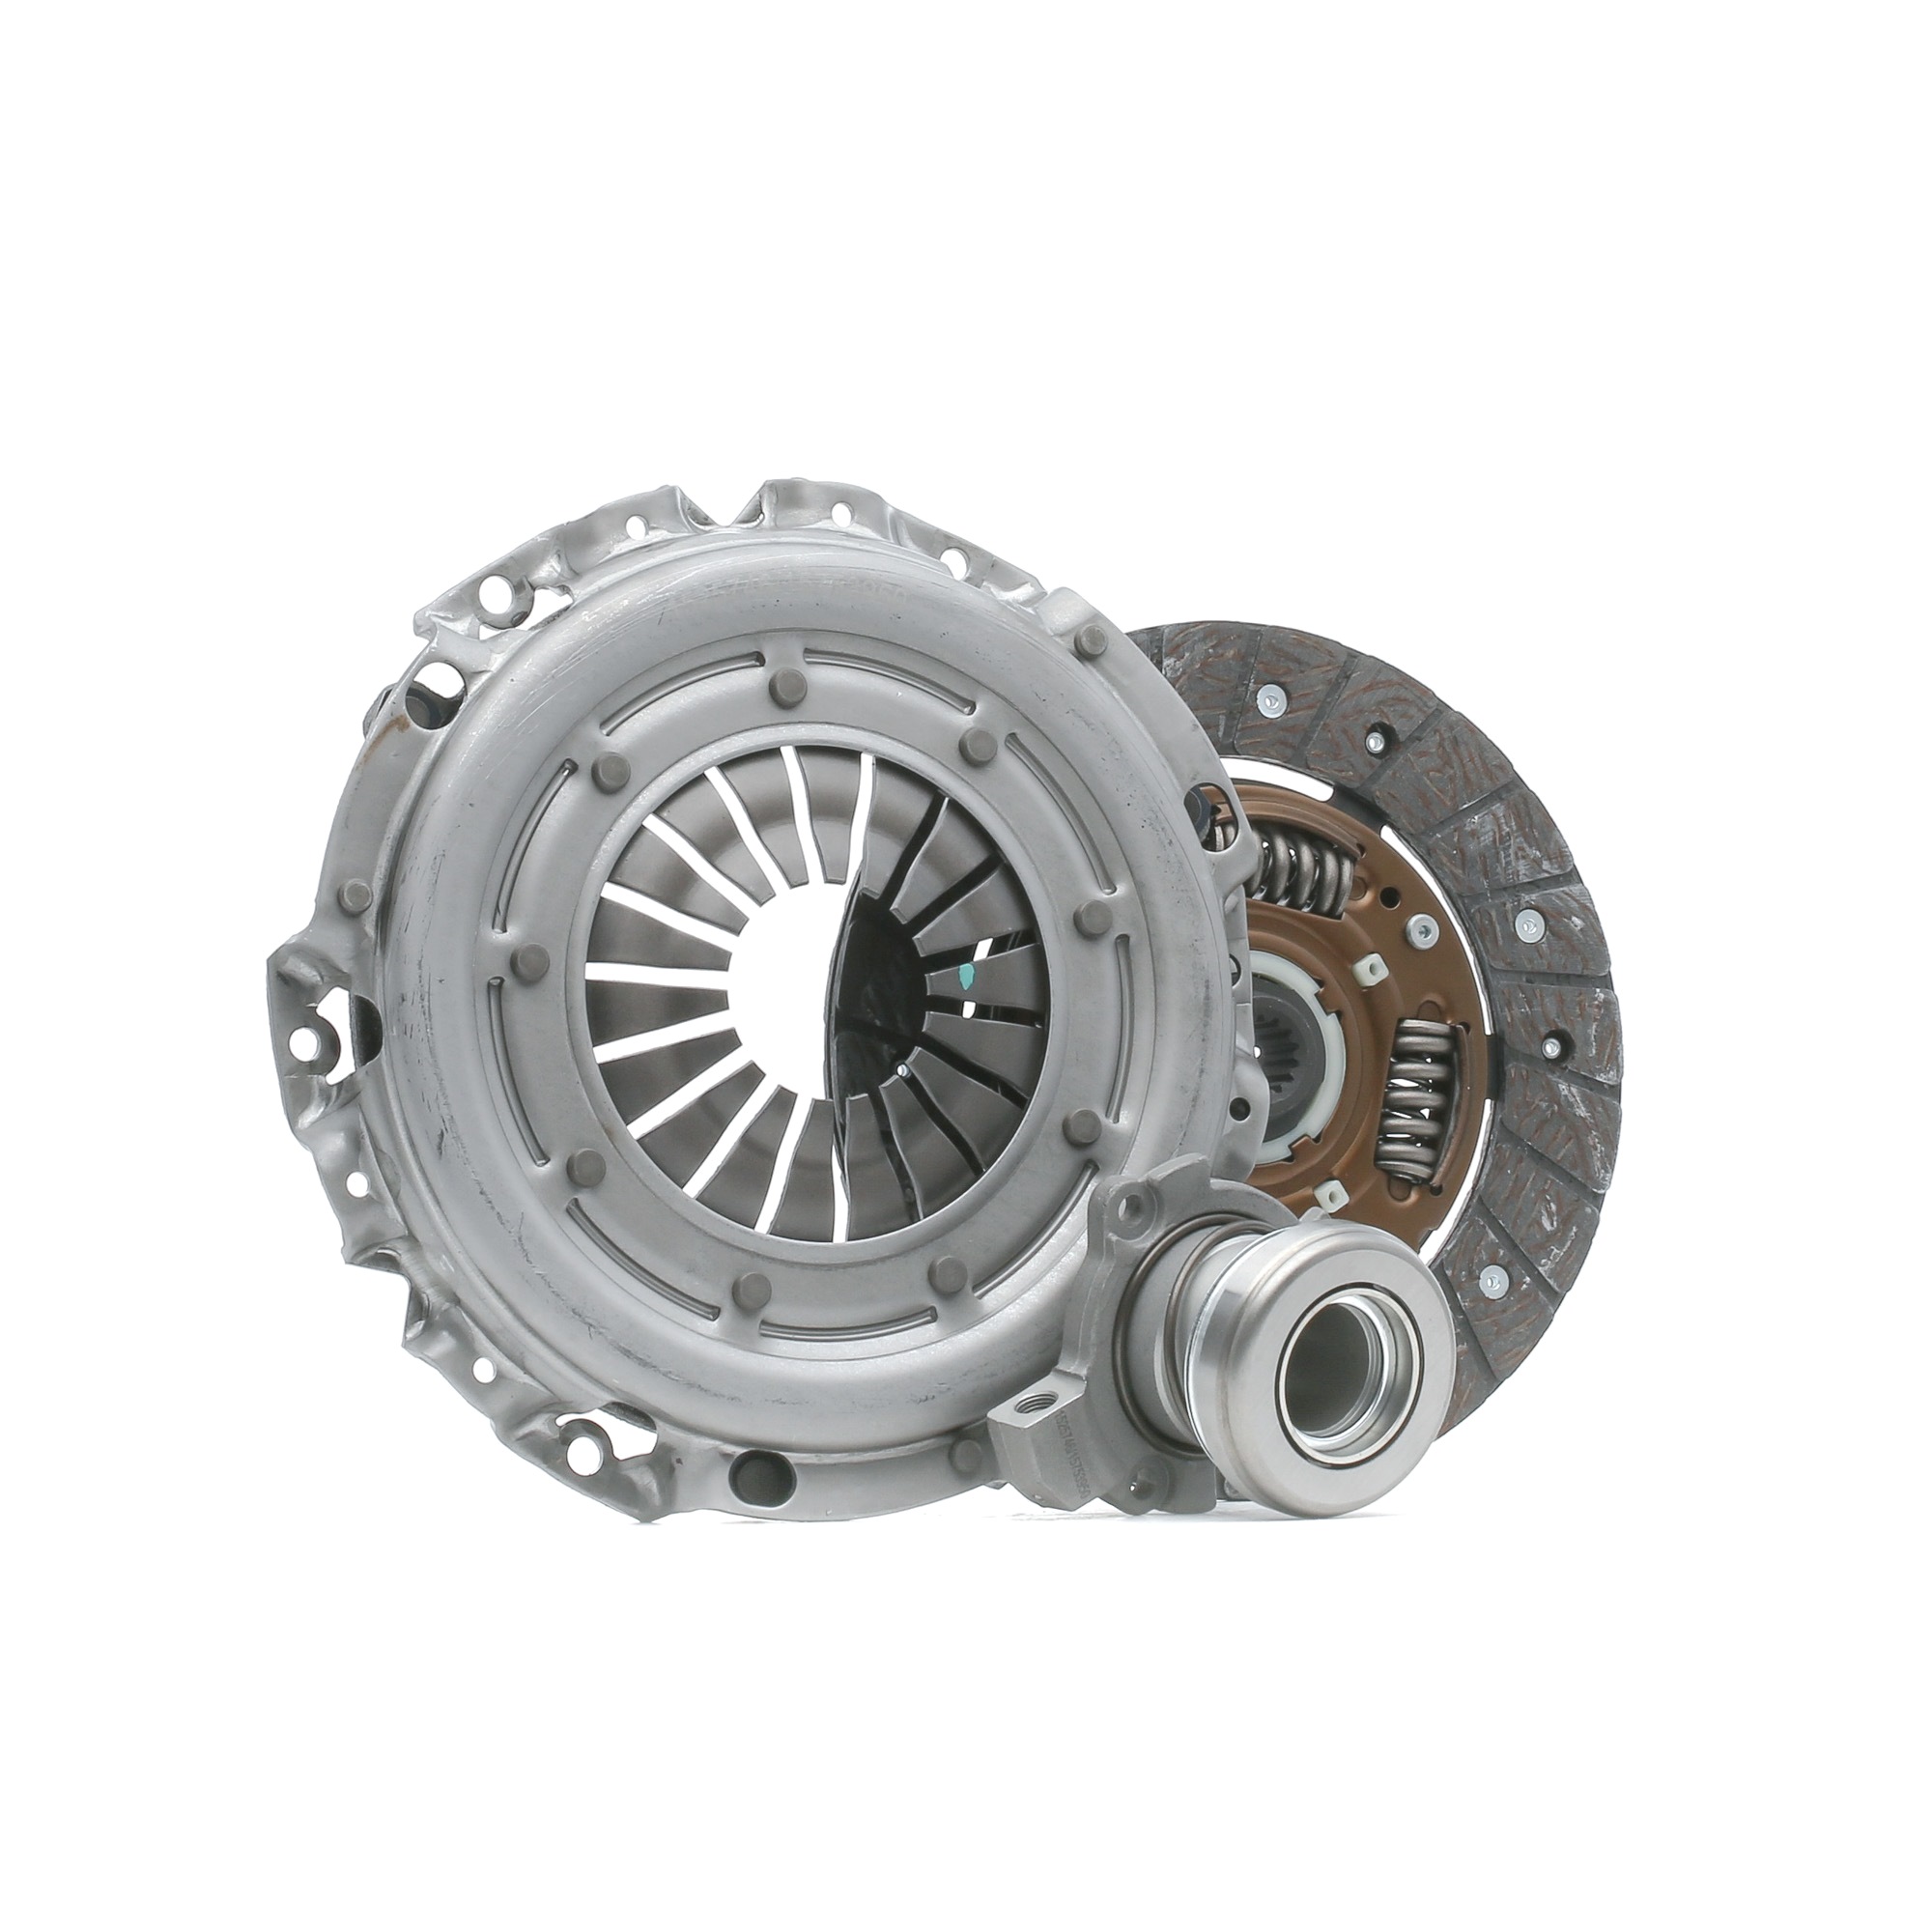 RIDEX 479C1018 Clutch kit with central slave cylinder, with clutch disc, 200mm